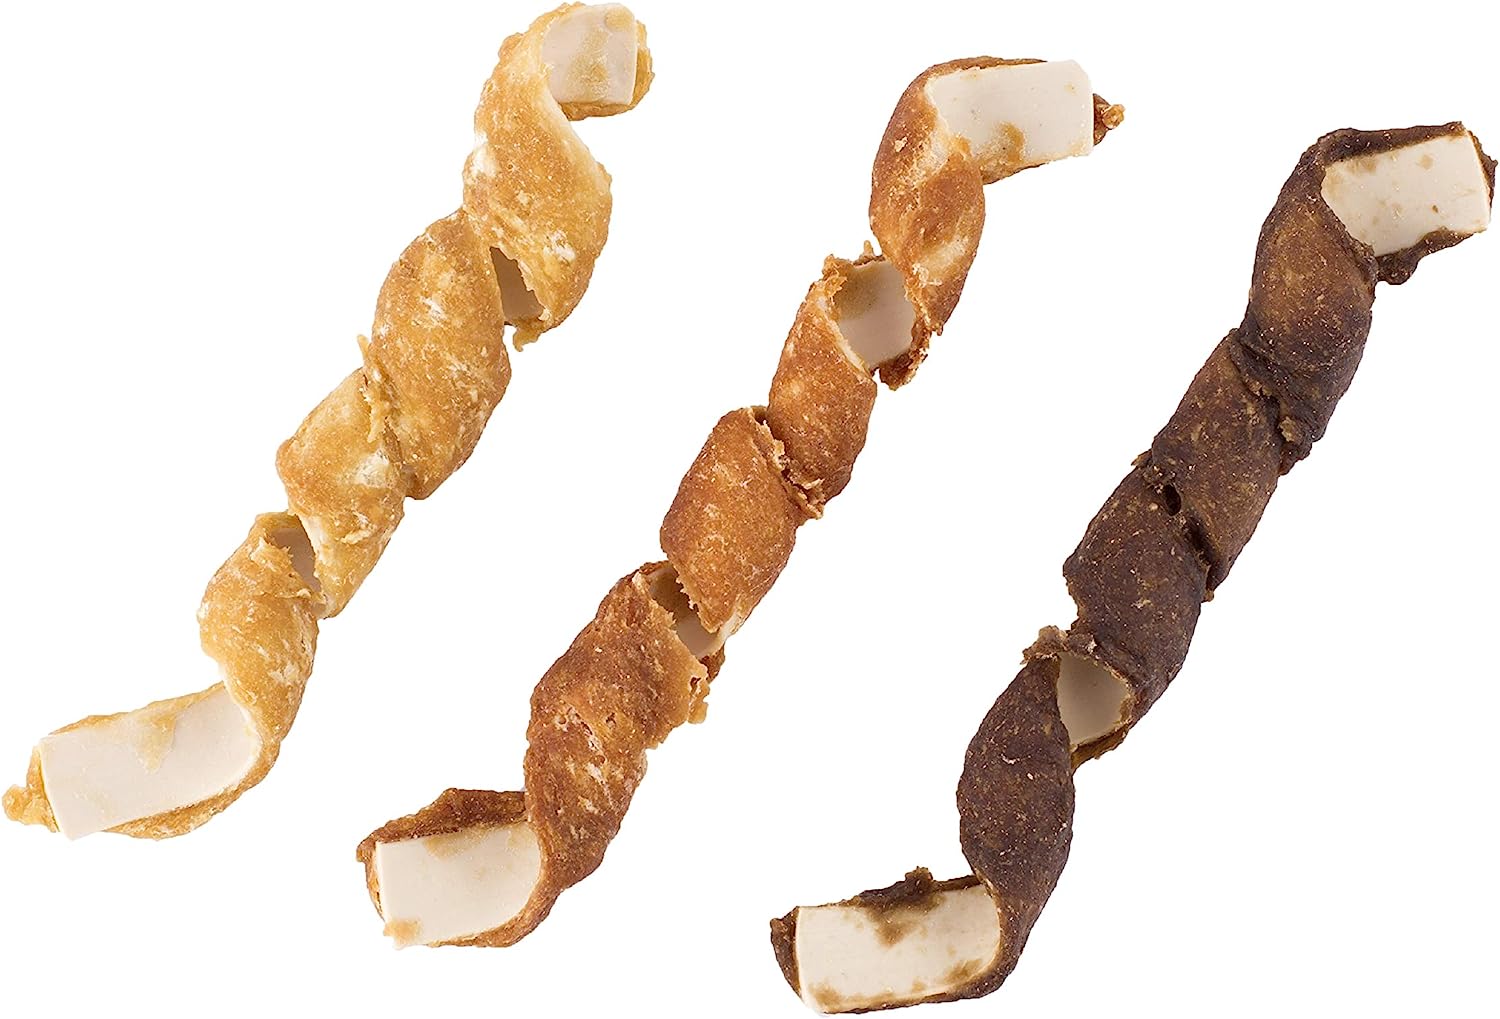 DreamBone Spirals Variety Pack, Treat Your Dog to a Chew Made with Real Meat and Vegetables : Pet Supplies